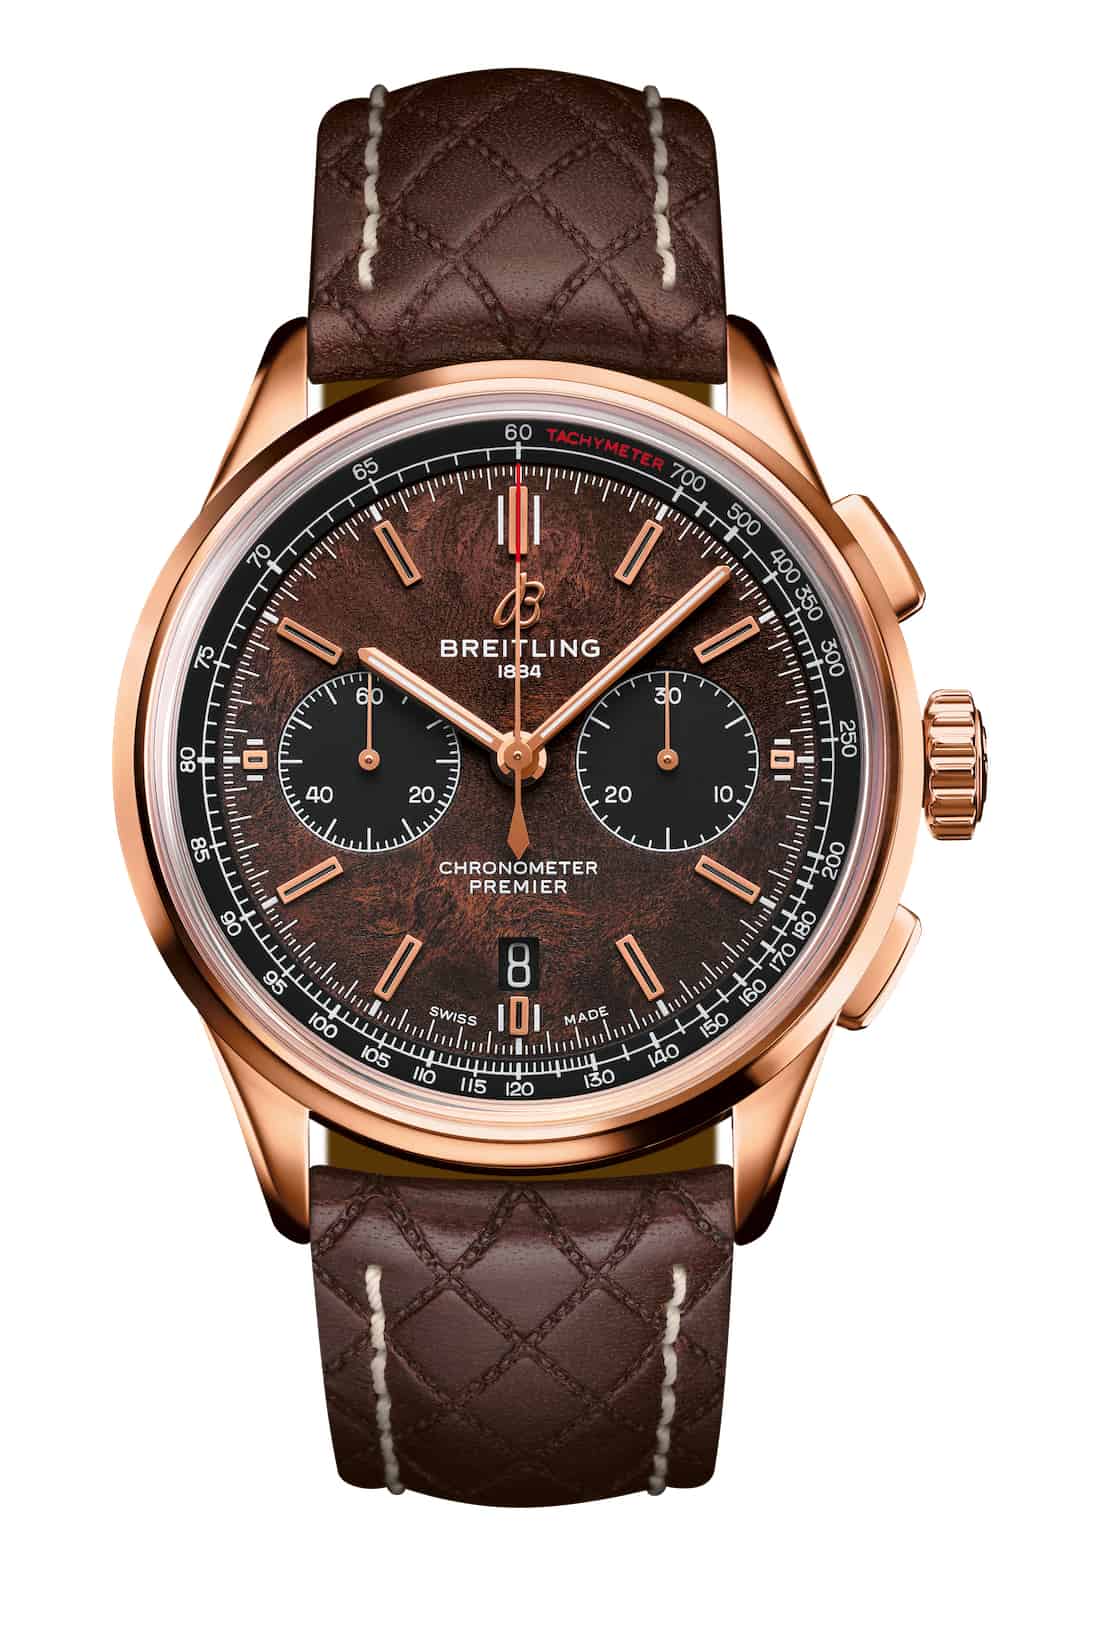 Breitling Premier Bentley Centenary Limited Edition Watch 17